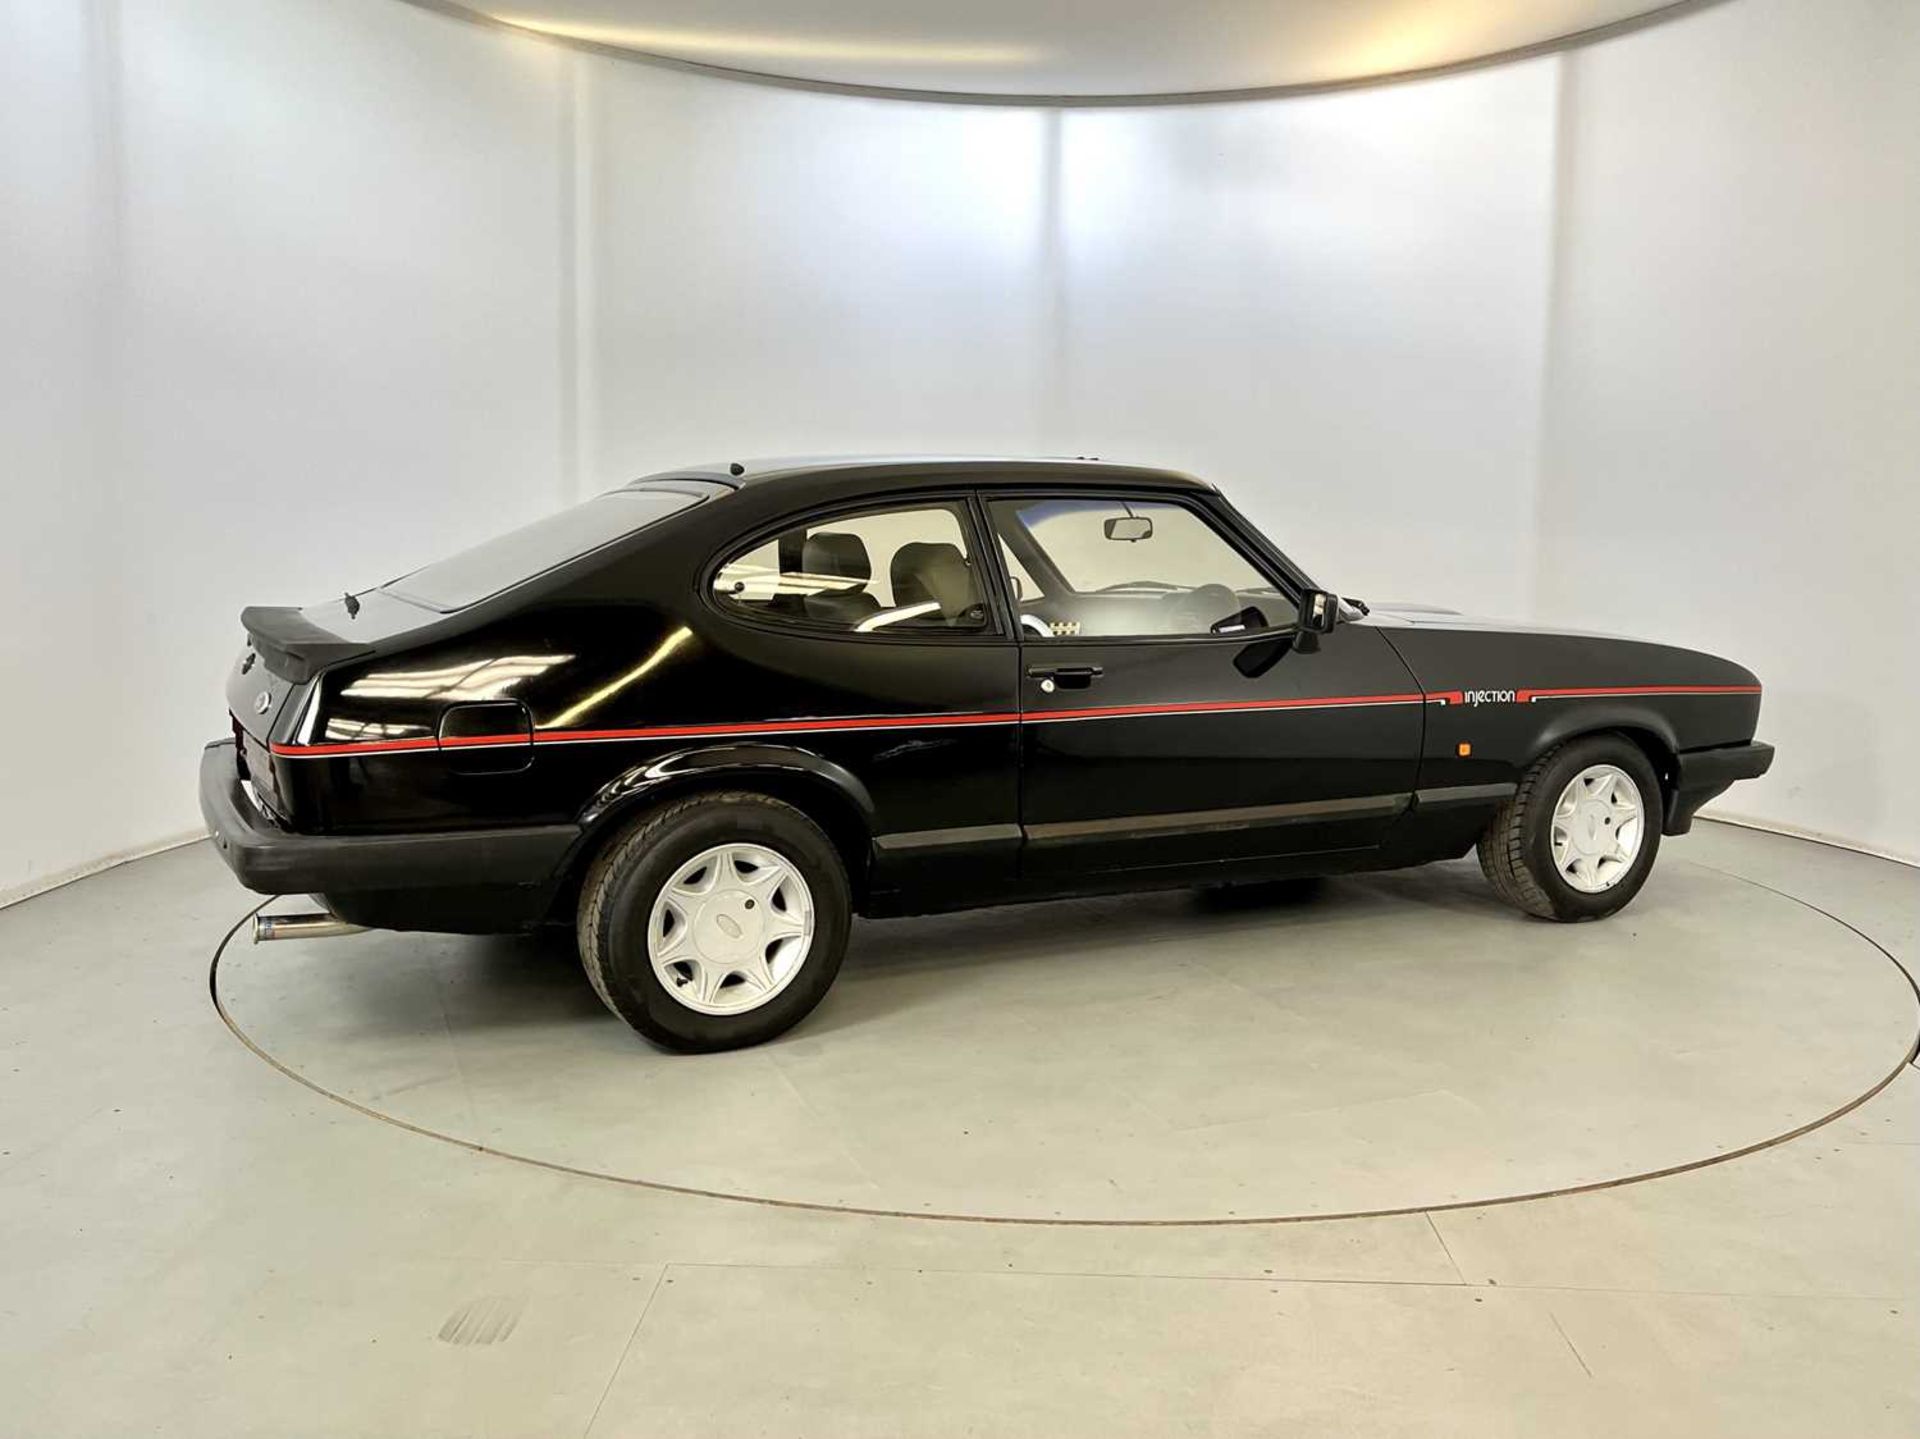 1987 Ford Capri 2.8 Injection - Image 10 of 28